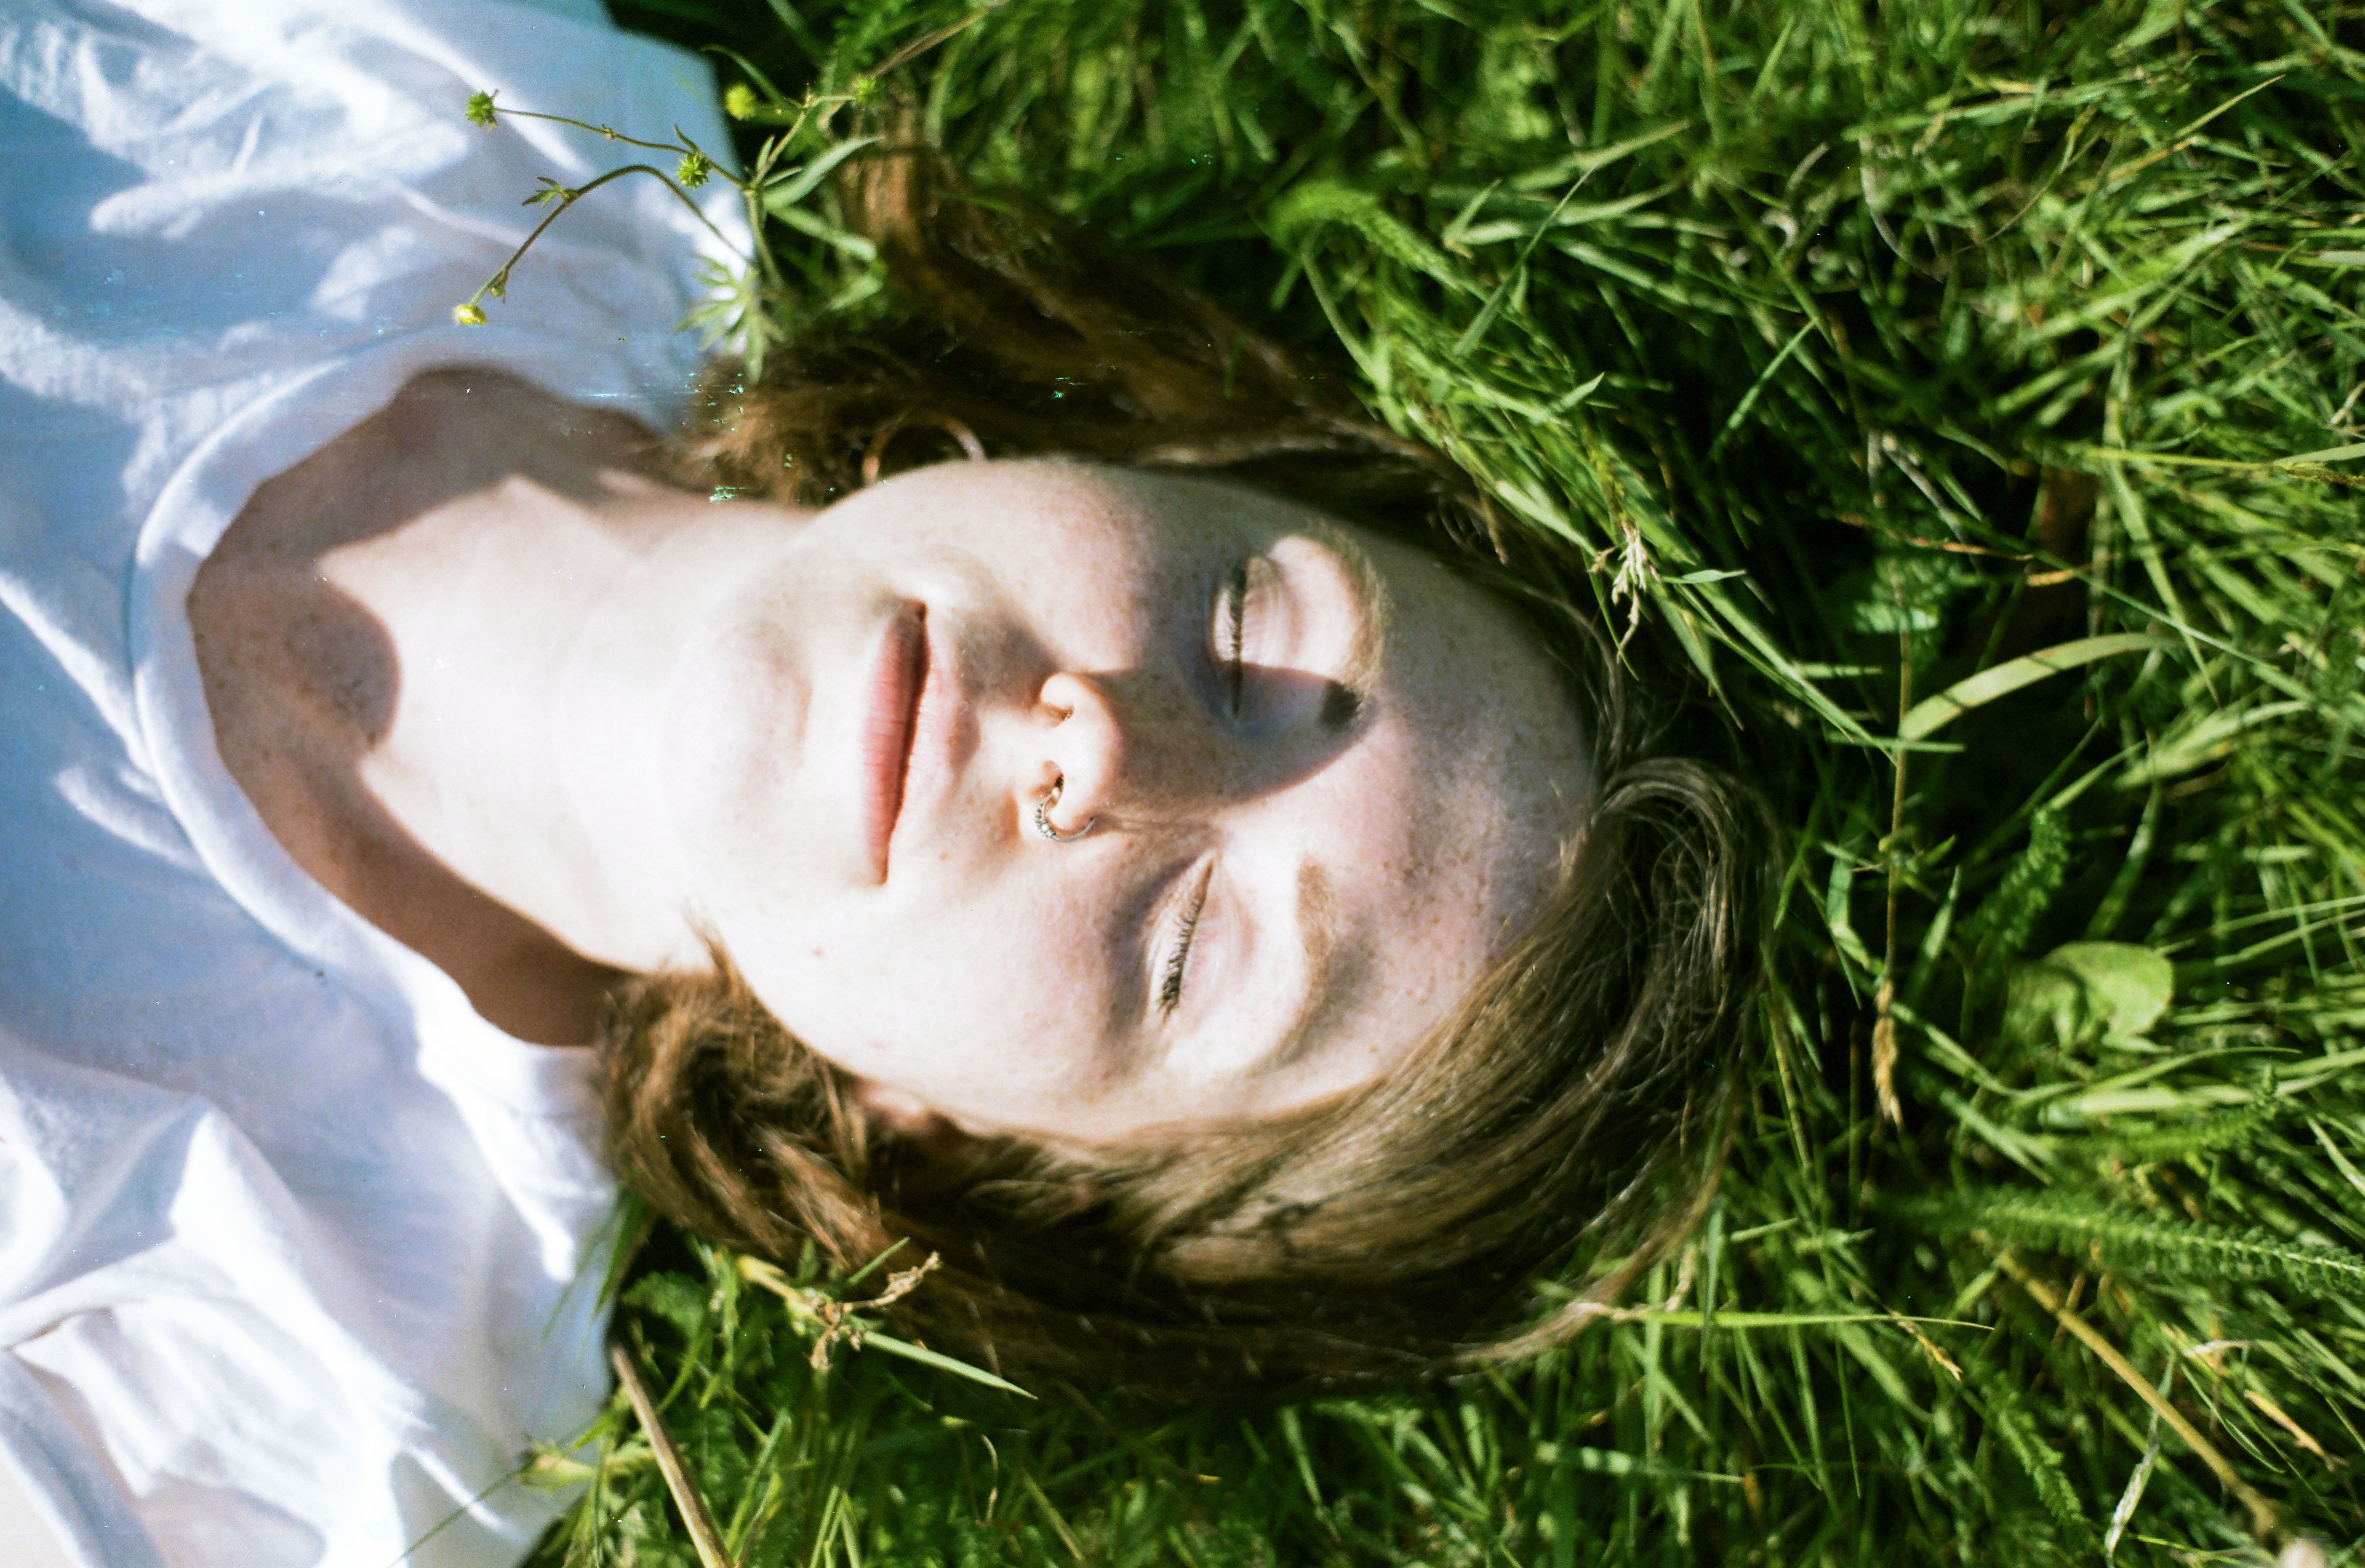 Child lying peacefully on green grass